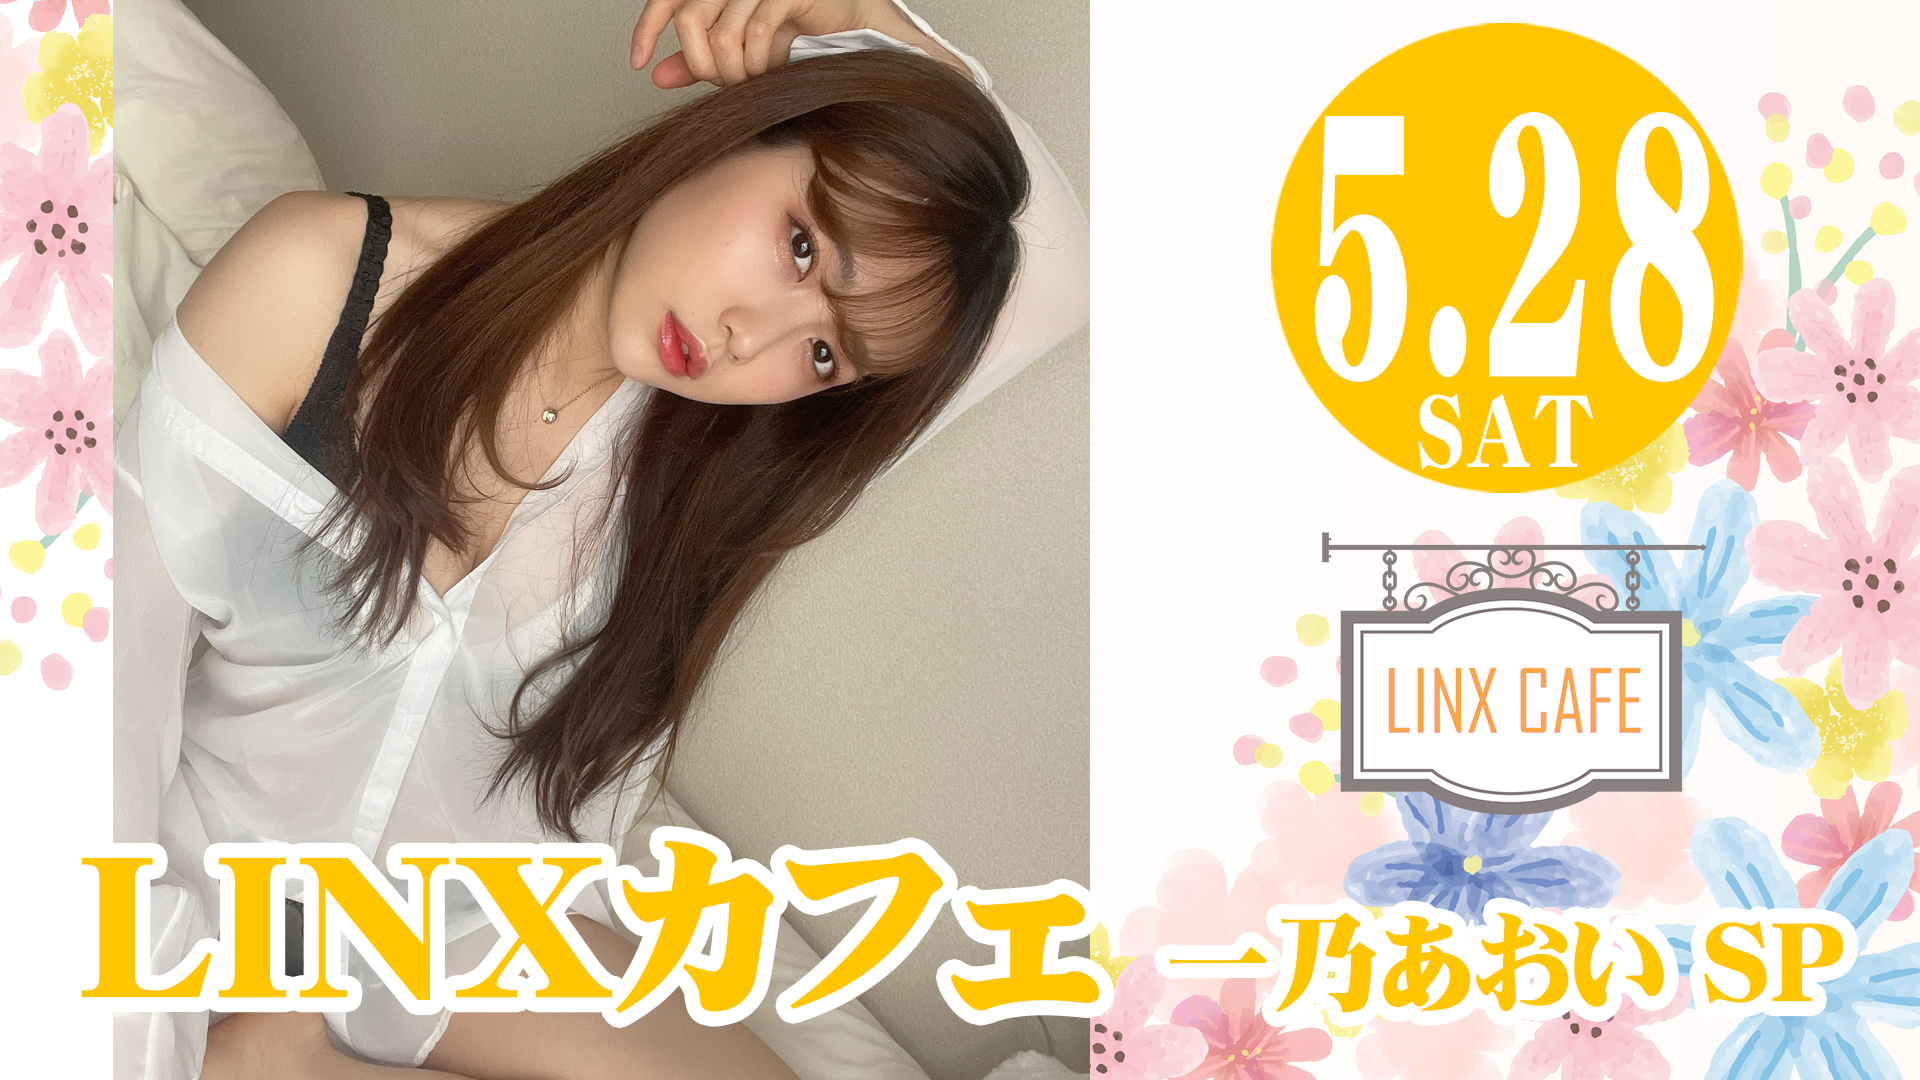 LINXカフェ　一乃あおいSP